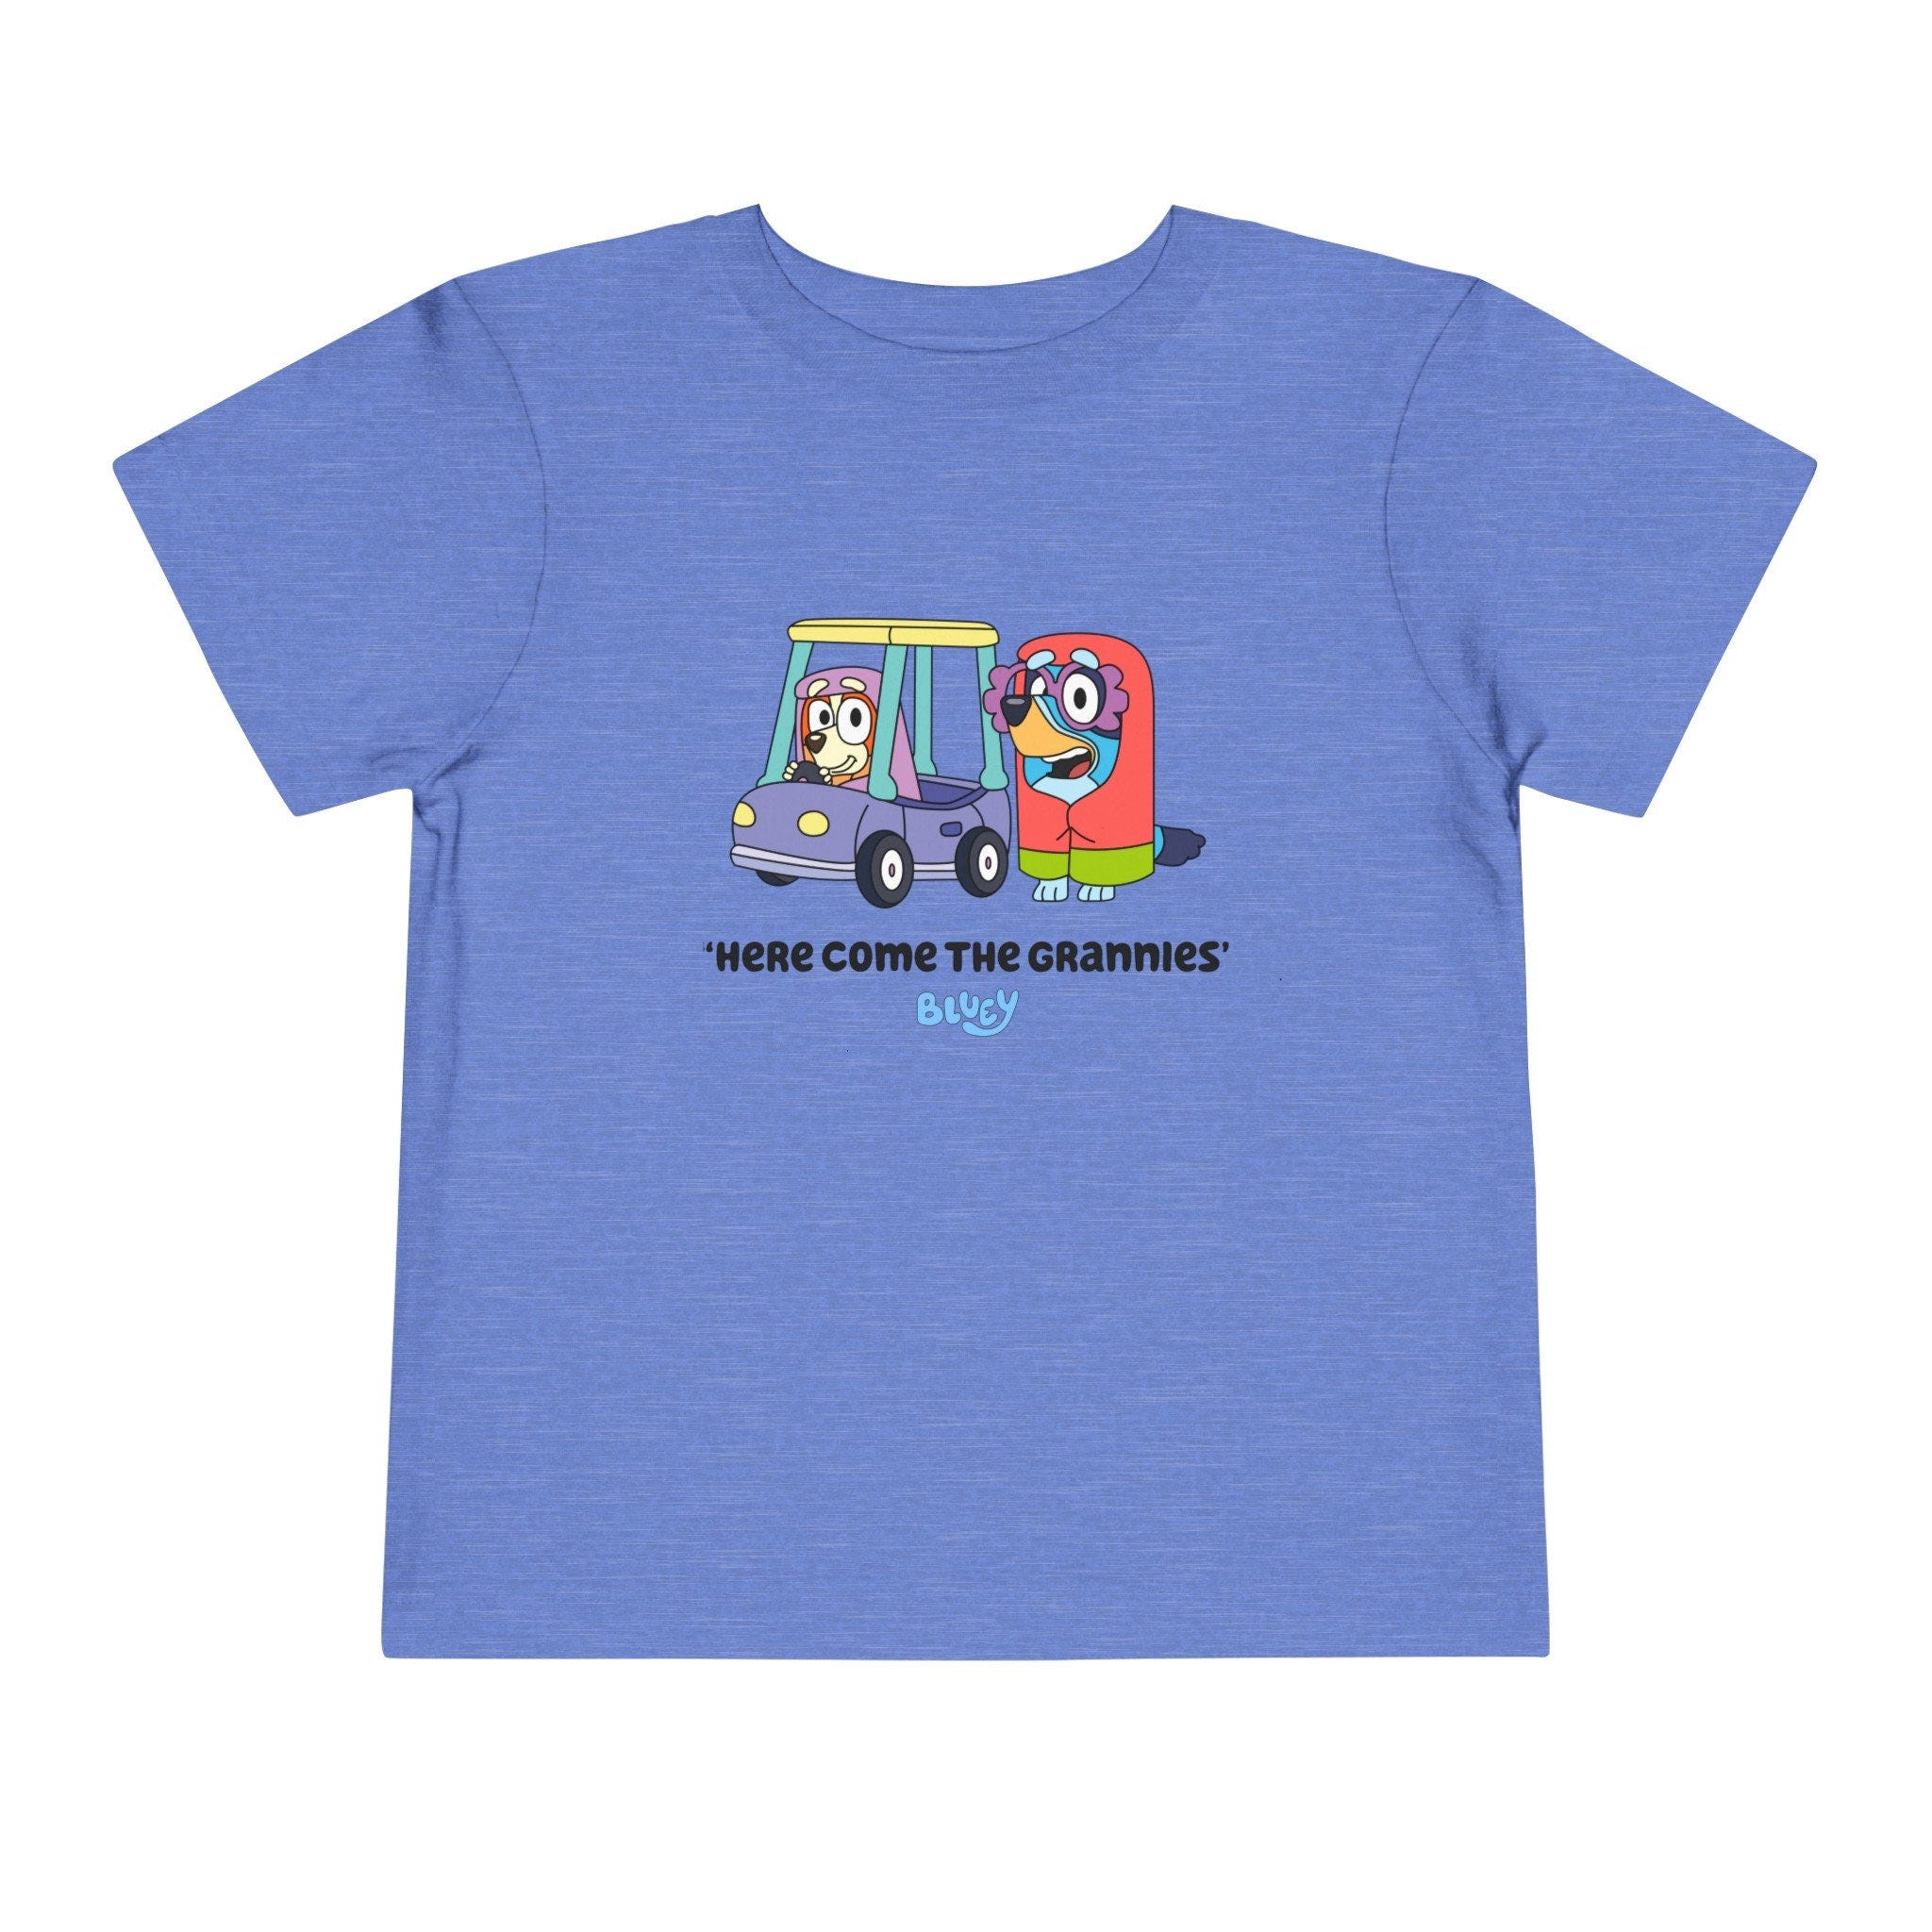 Bluey Grannies, Bluey and Friends, Here Come the Grannies, Birthday, Dance Mode, Party, Bluey Gift -Toddler Short Sleeve Tee